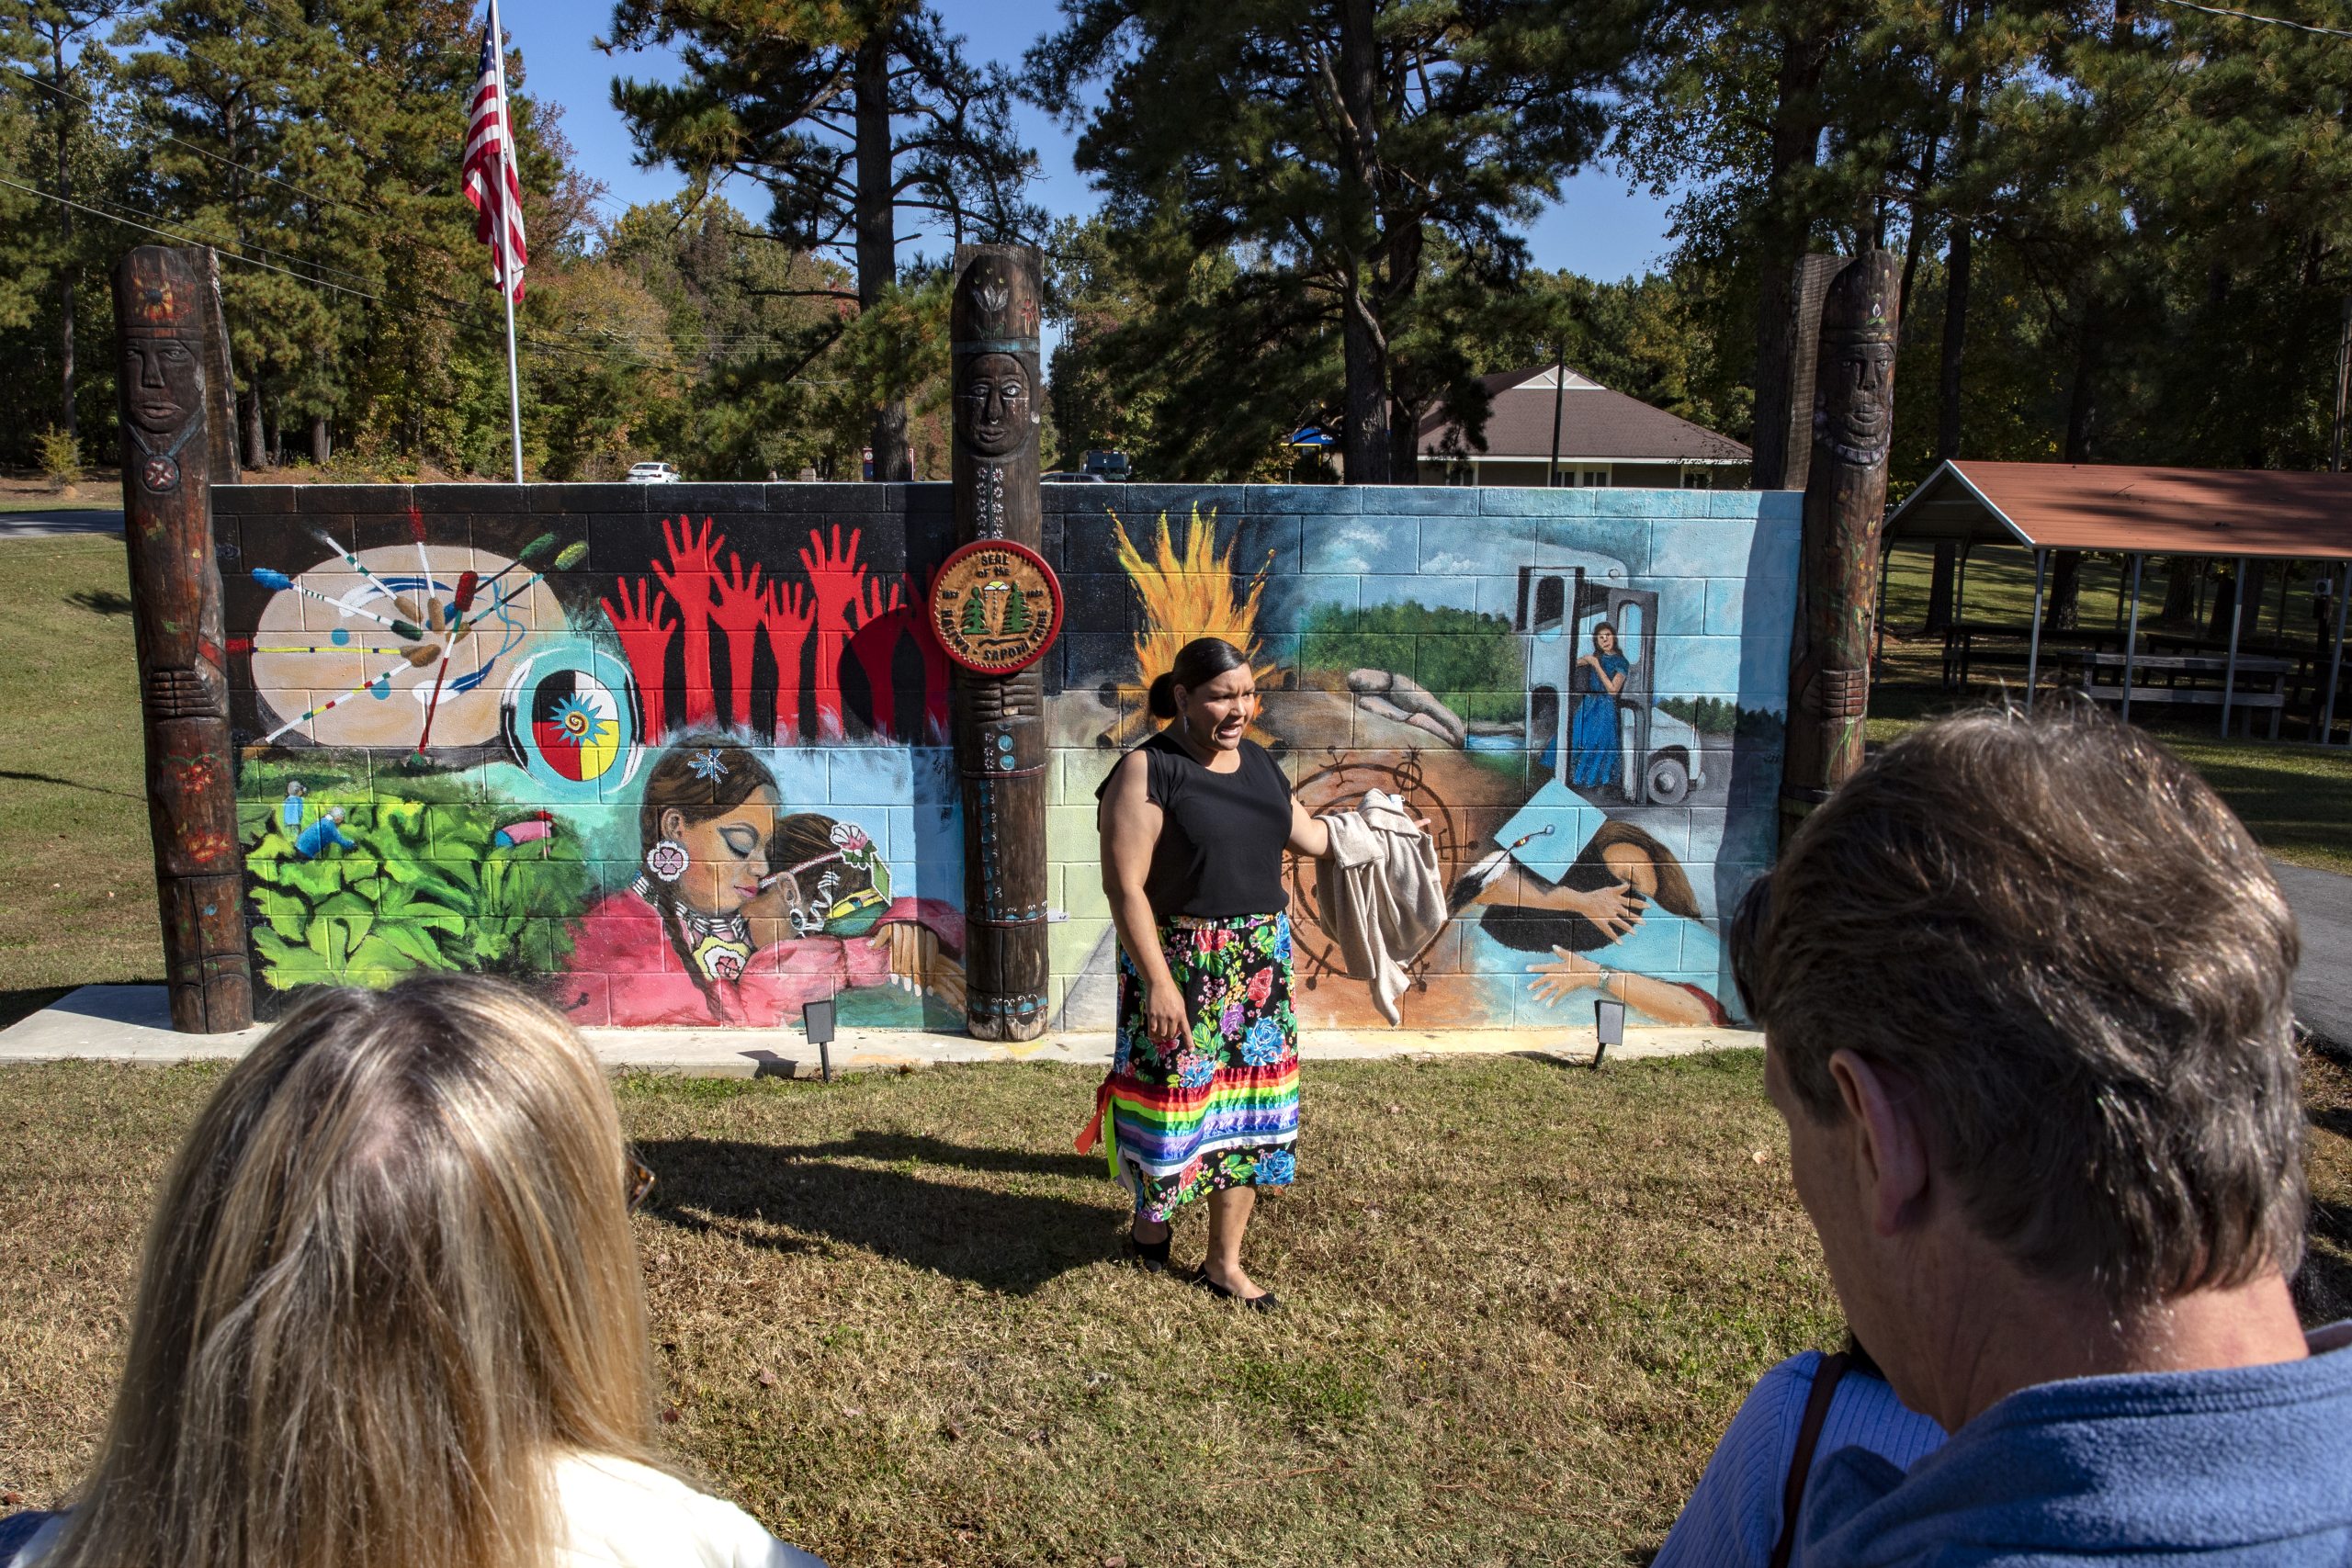 American Indian woman speaking in front of a mural